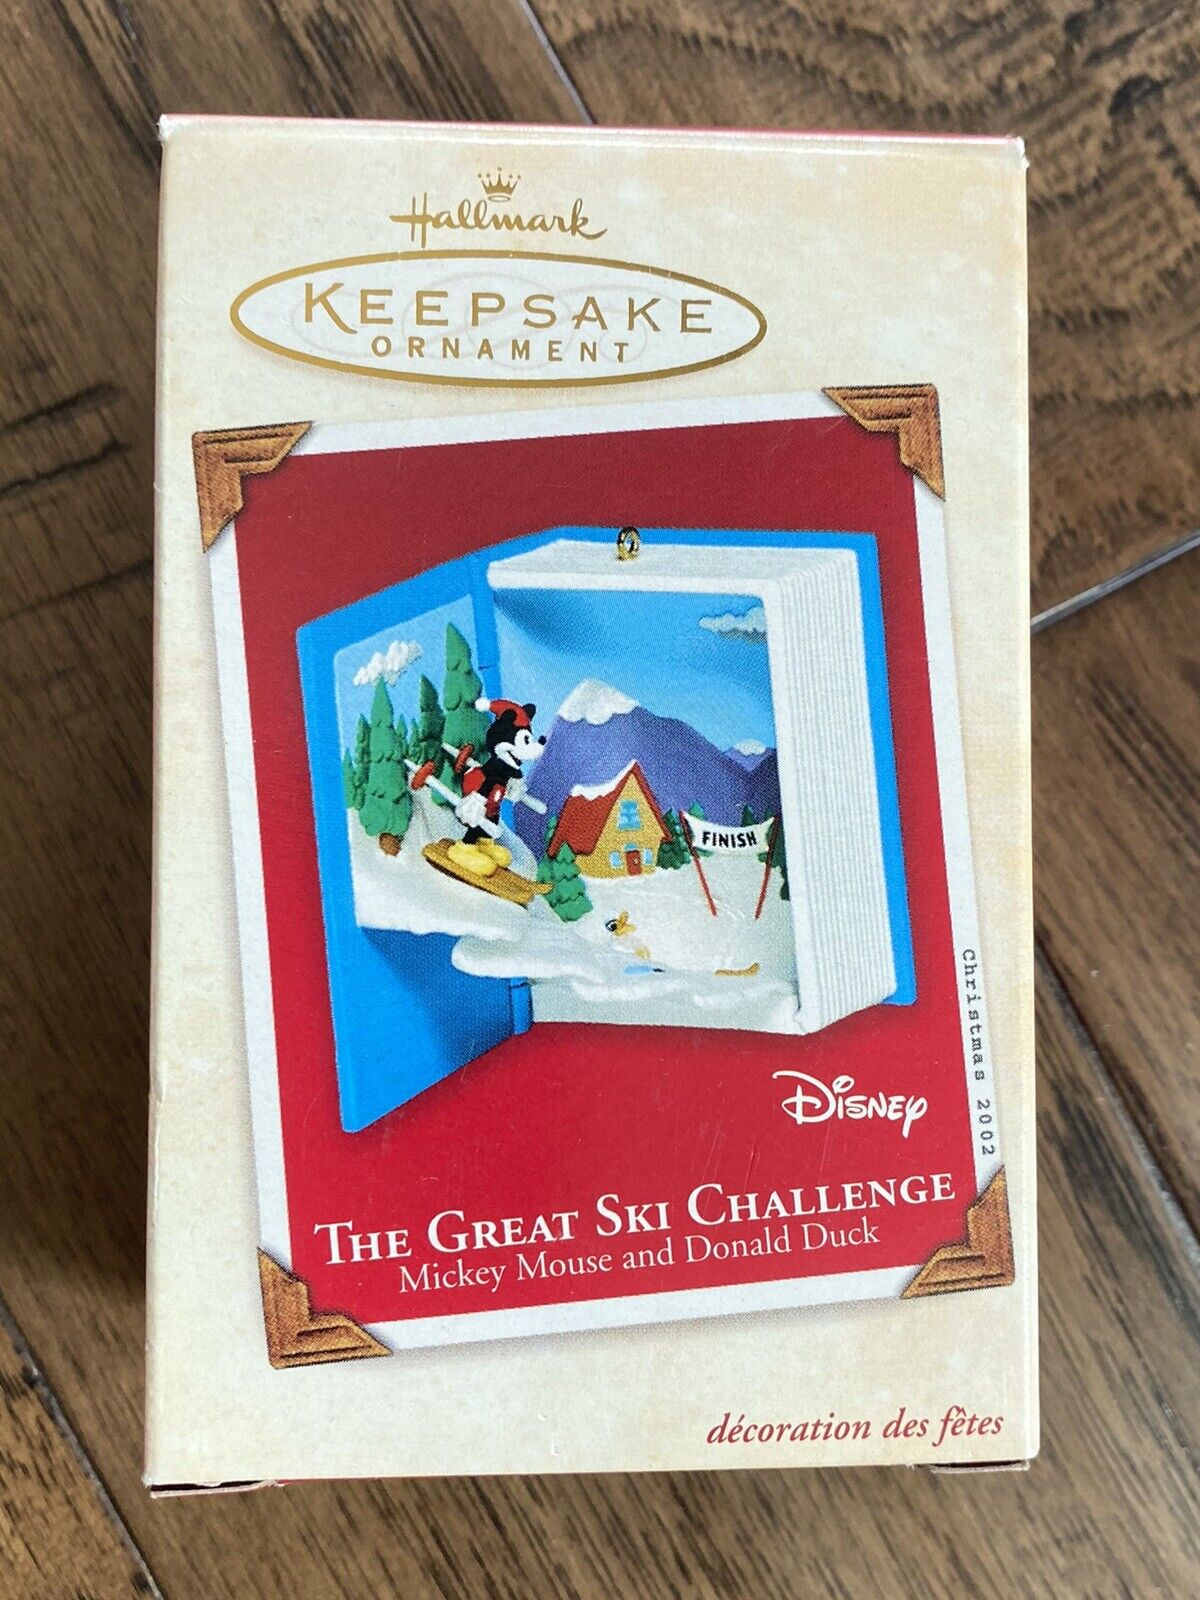 HALLMARK 2002 THE GREAT SKI CHALLENGE MICKEY MOUSE AND DONALD DUCK ORNAMENT